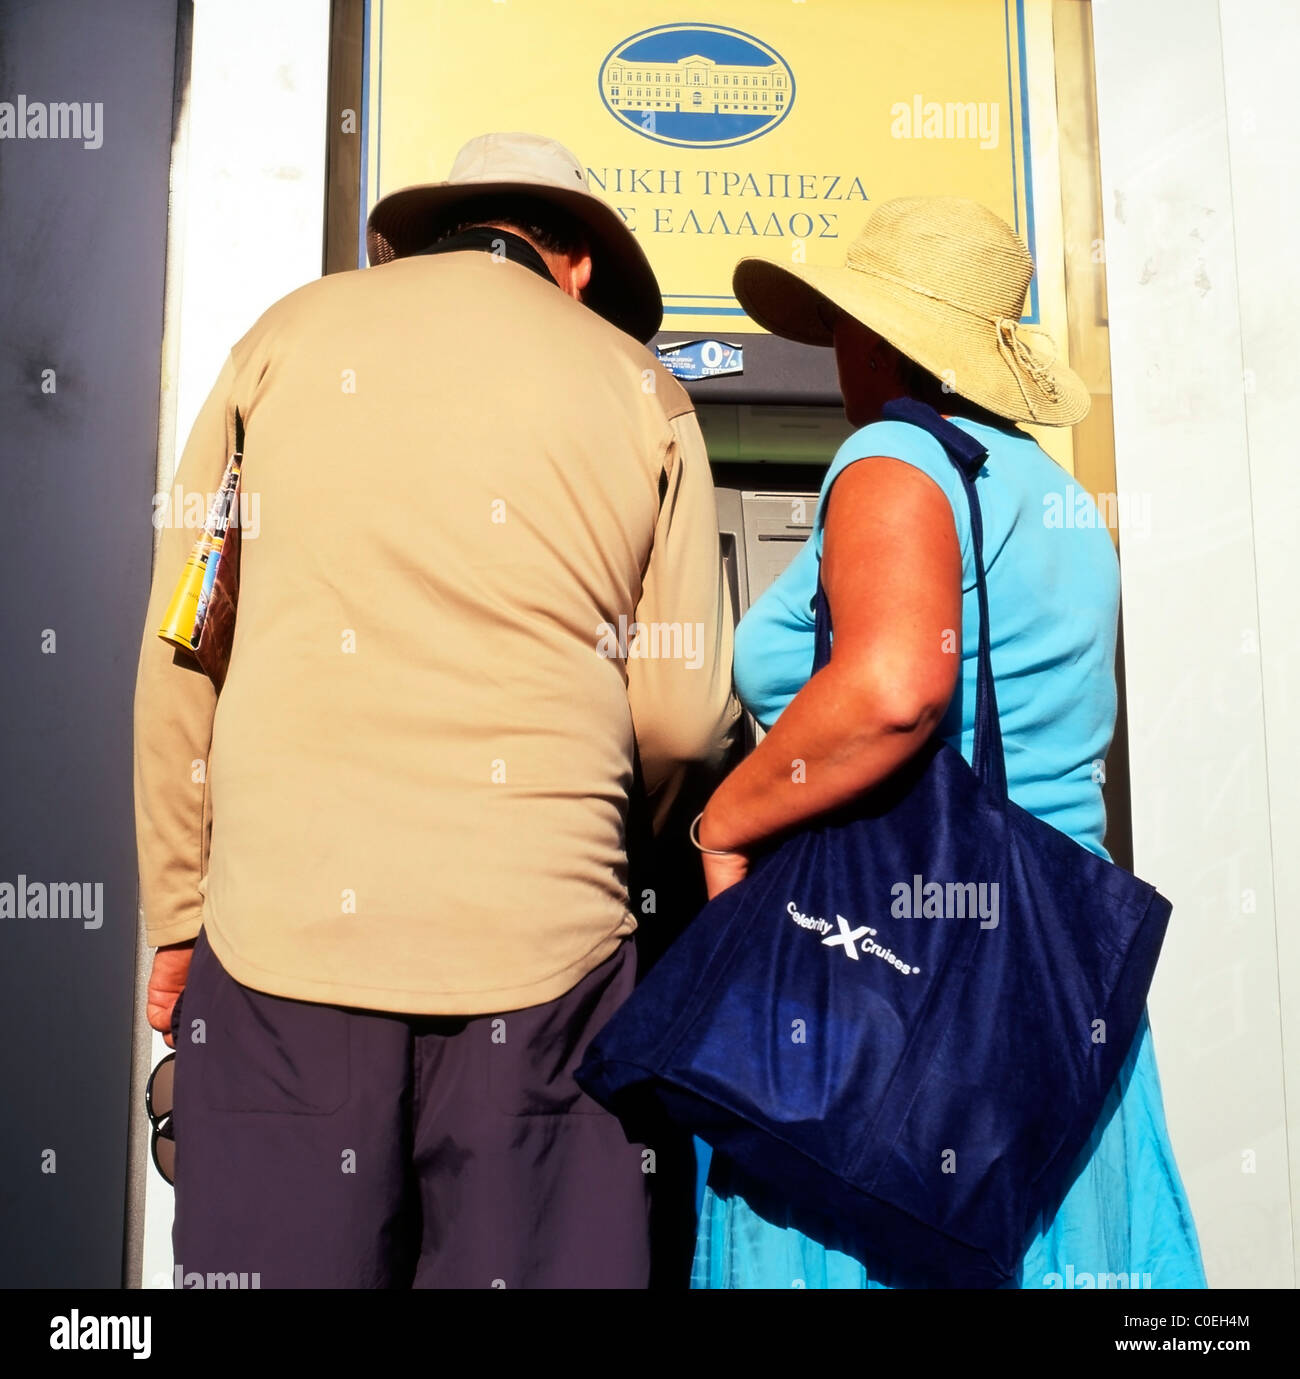 A middle-aged couple faceless tourists getting money out from an ATM cash machine Santorini, Greek Islands, Greece  KATHY DEWITT Stock Photo